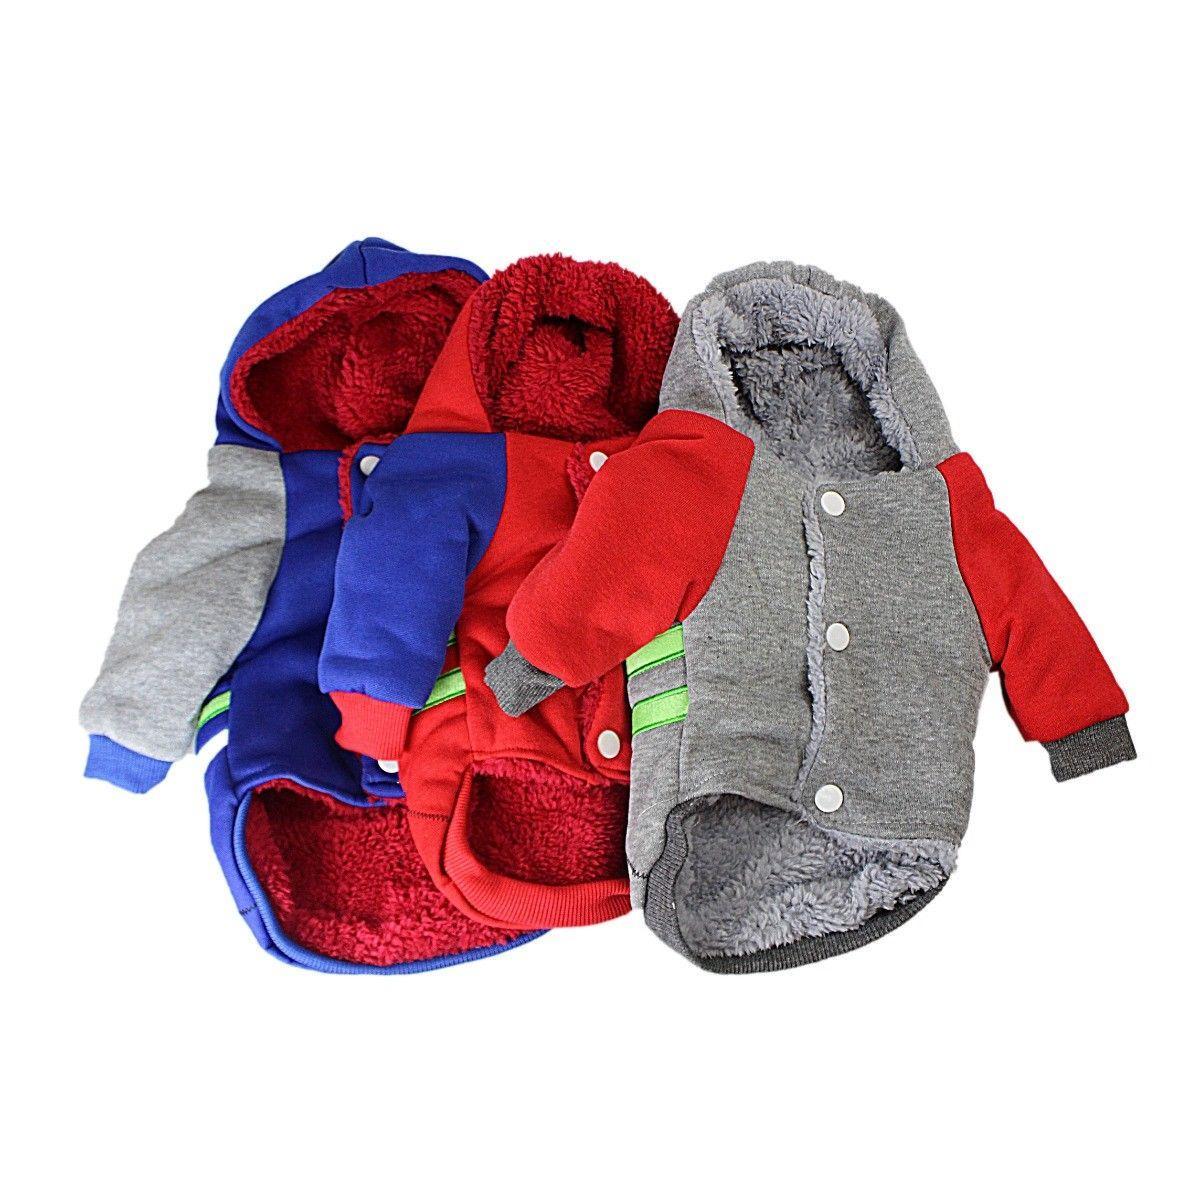 Dogs Harness Style Fabric Jacket Size Small 17cm x 22cm Assorted Colours Pets 1813 (Parcel Rate)